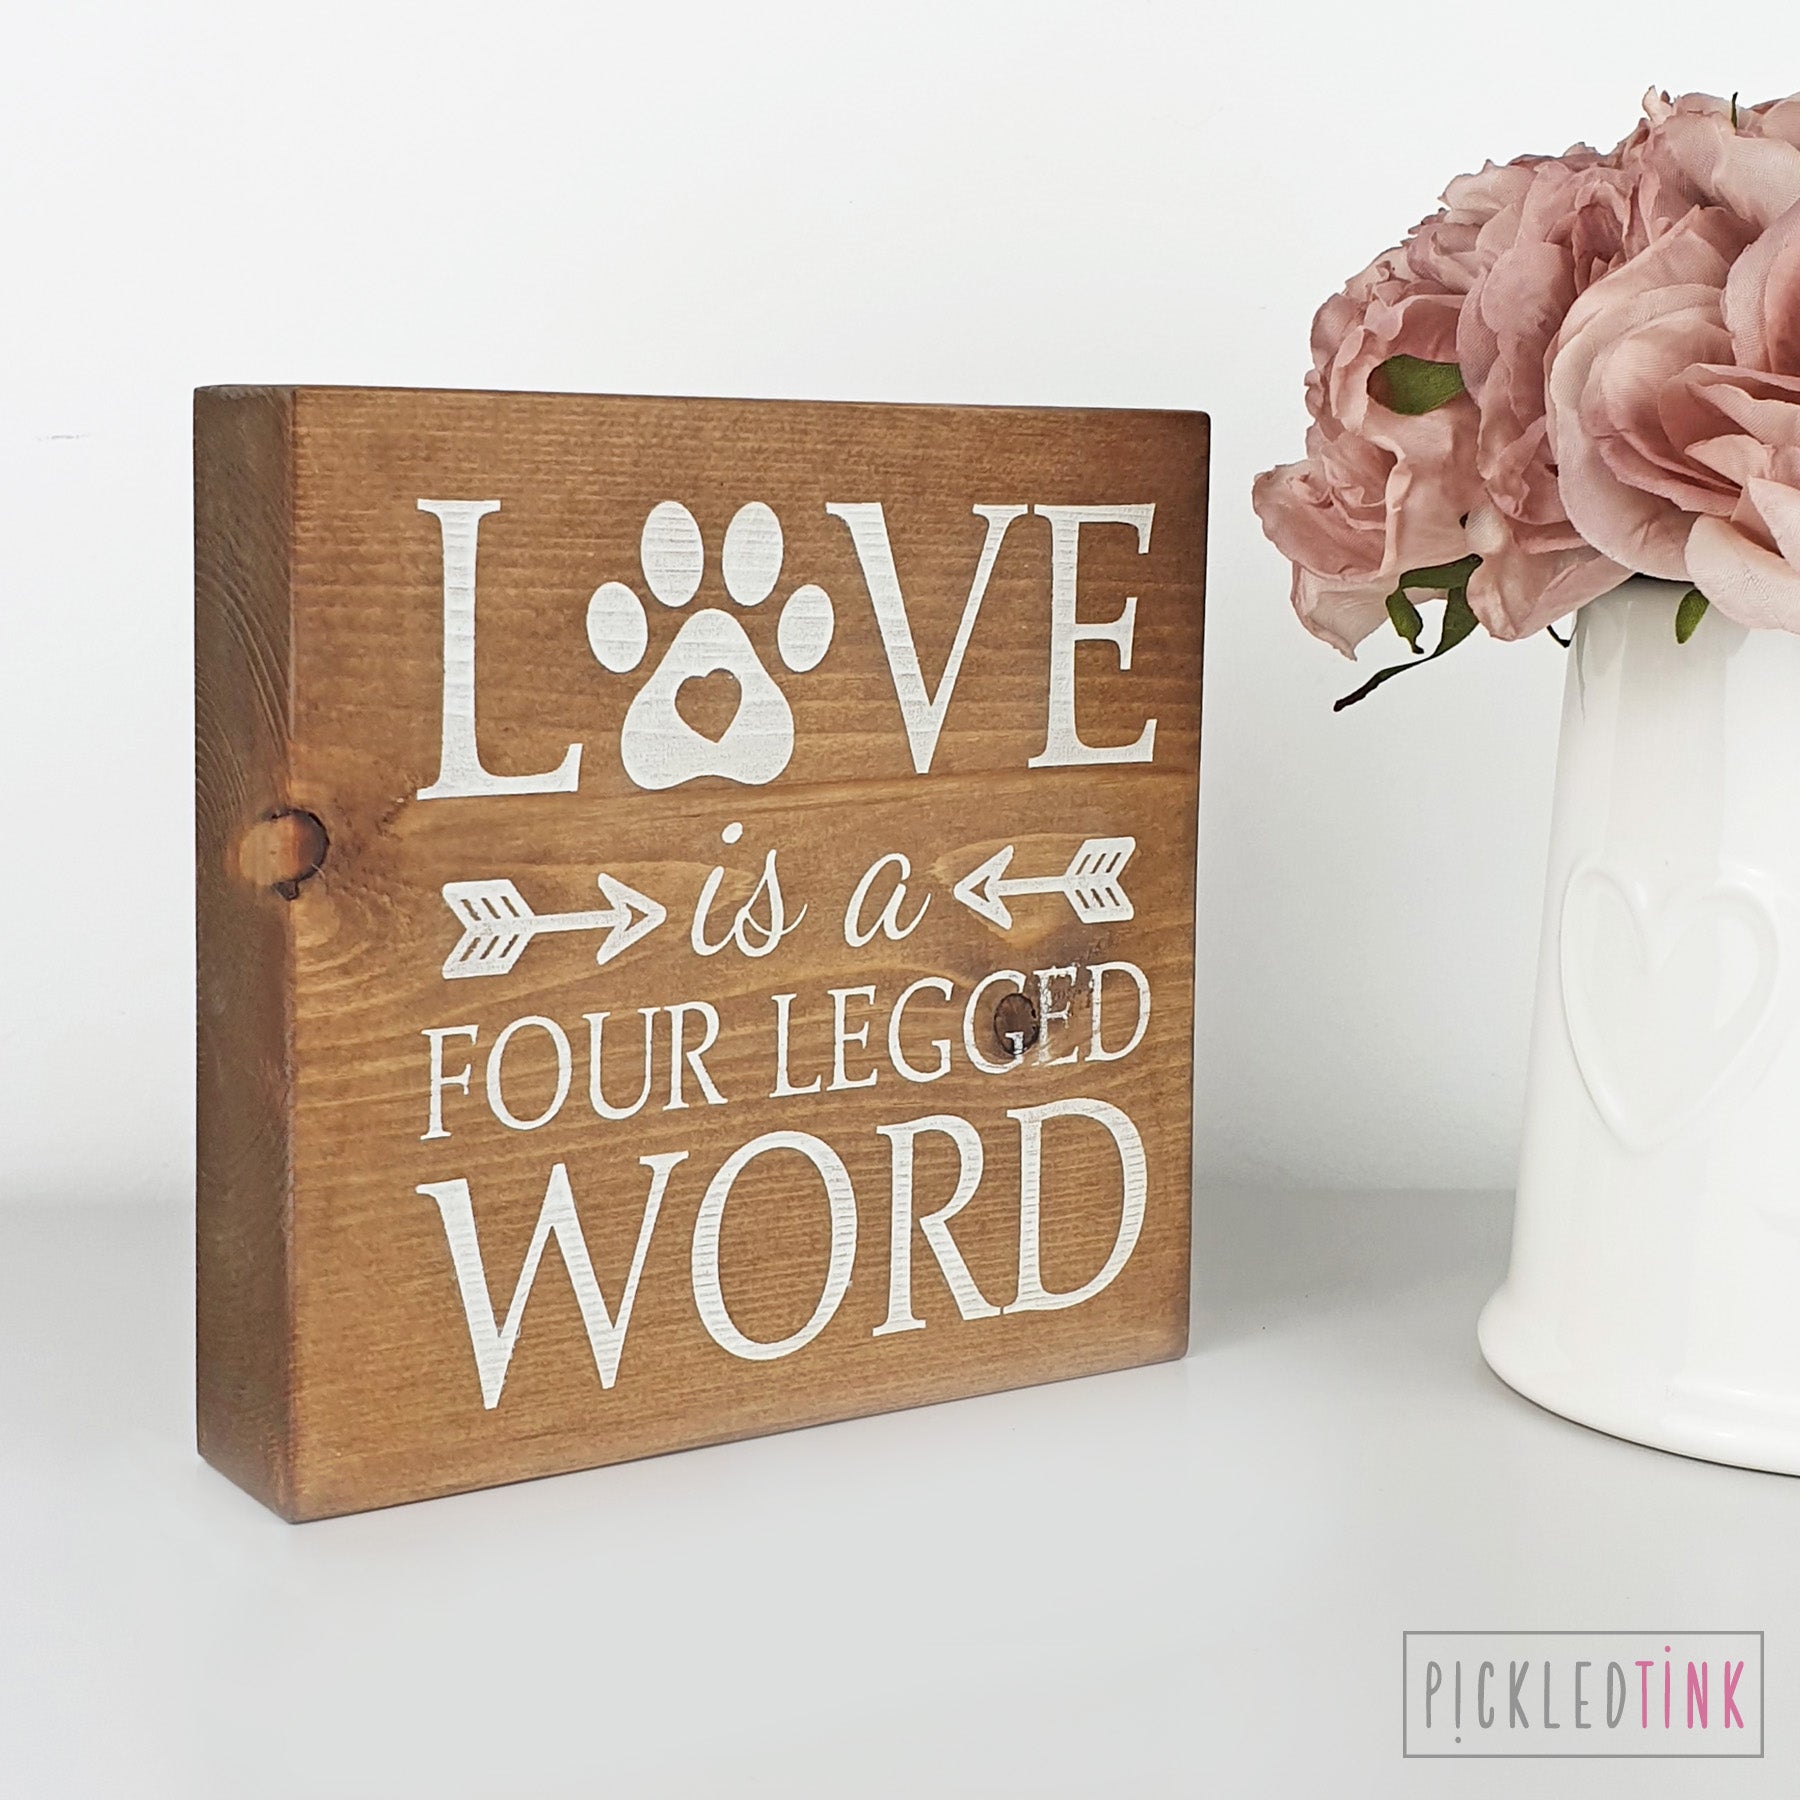 Love is a four legged word Wooden Block